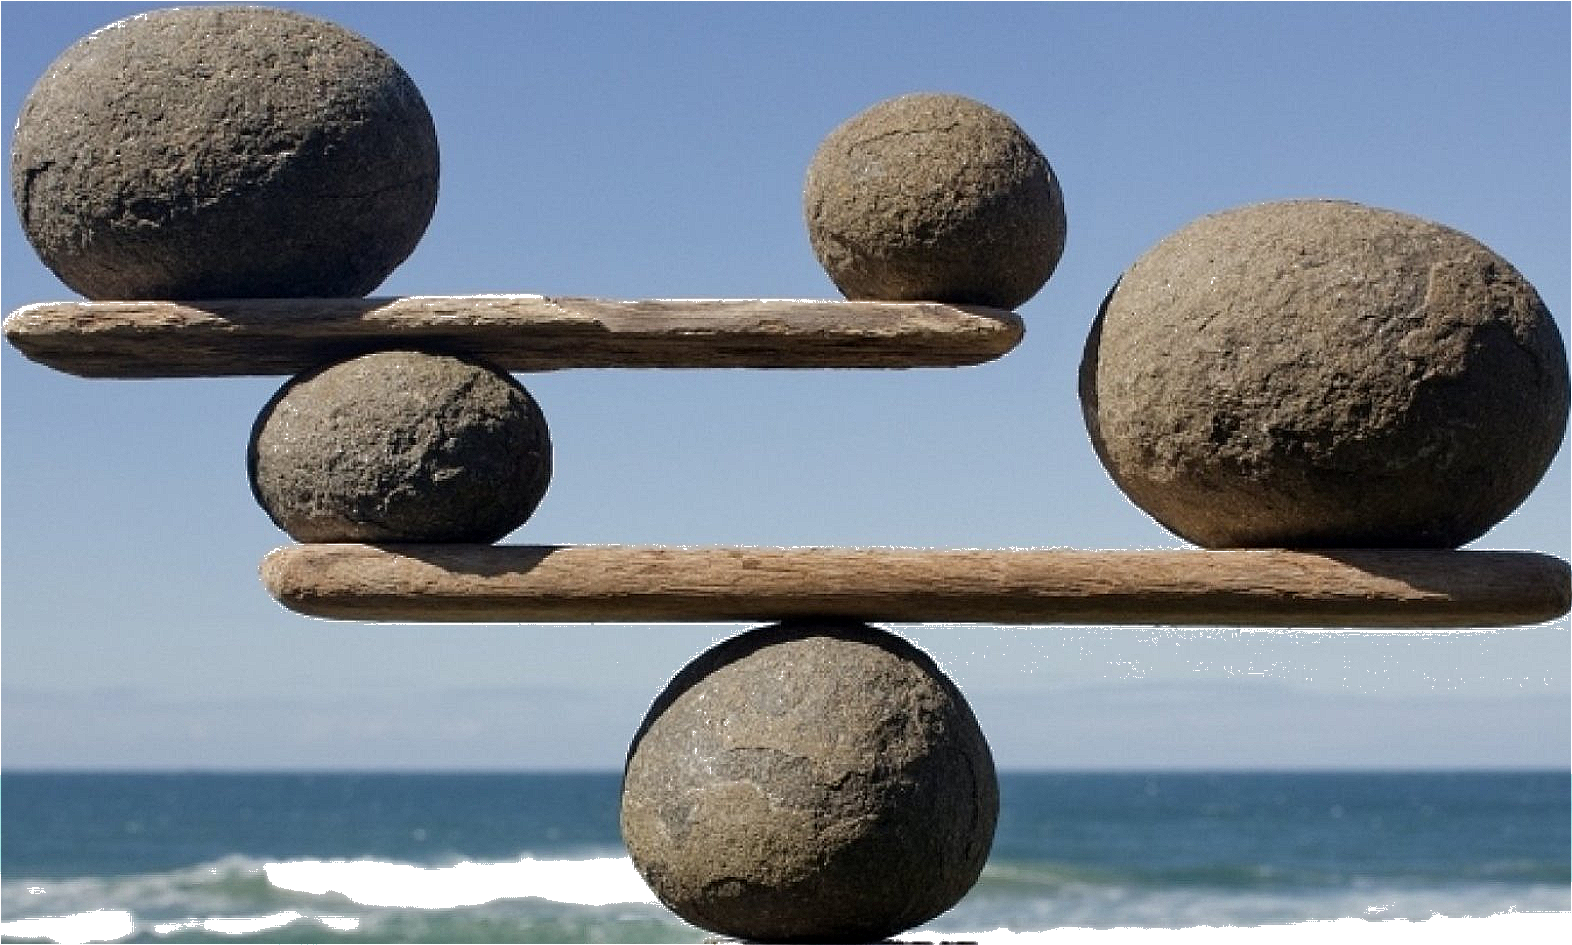 All Balanced Rocks, Its this balance every mobile user should aim for